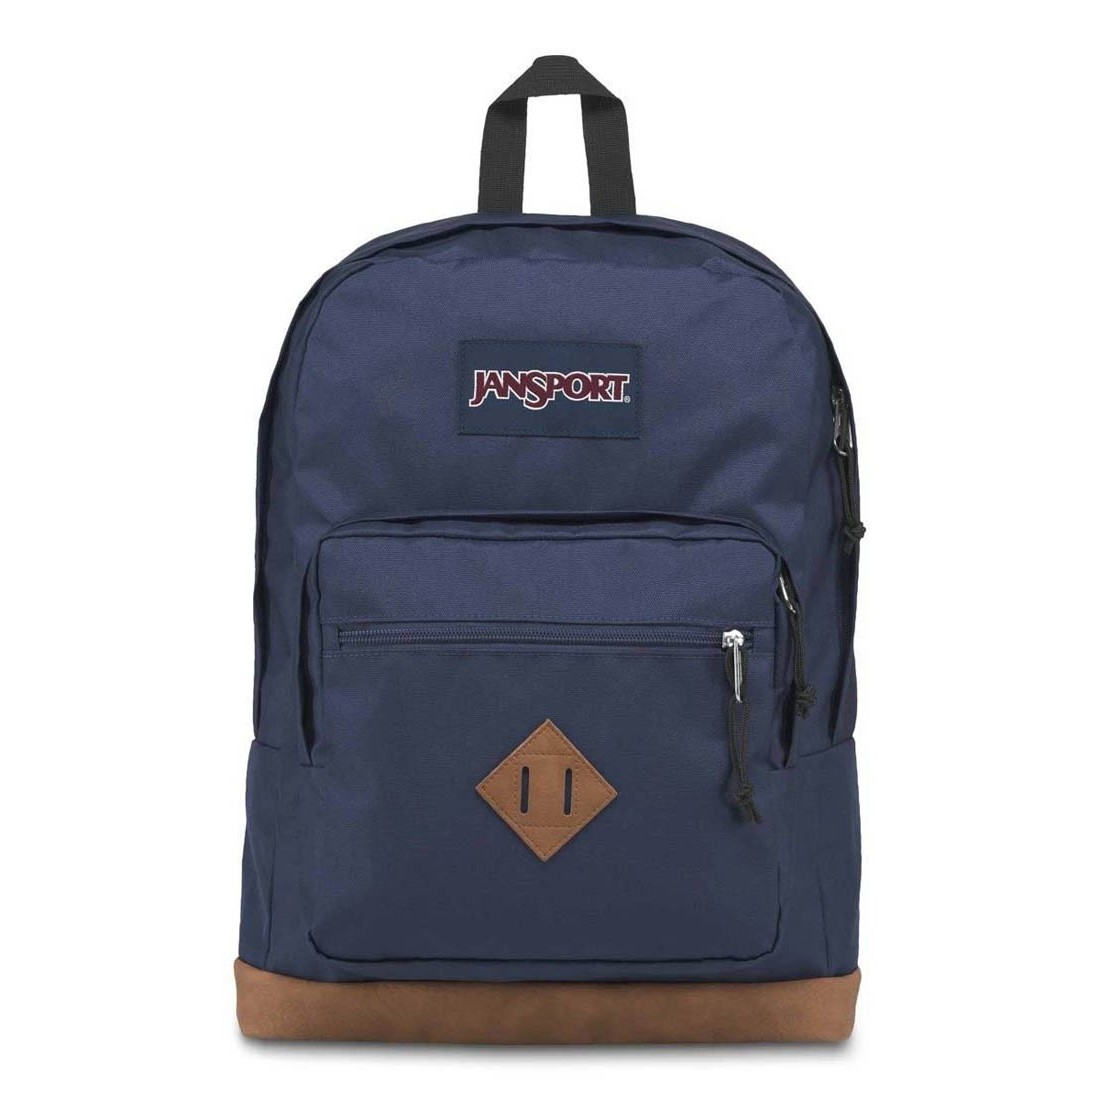 jansport backpack city view